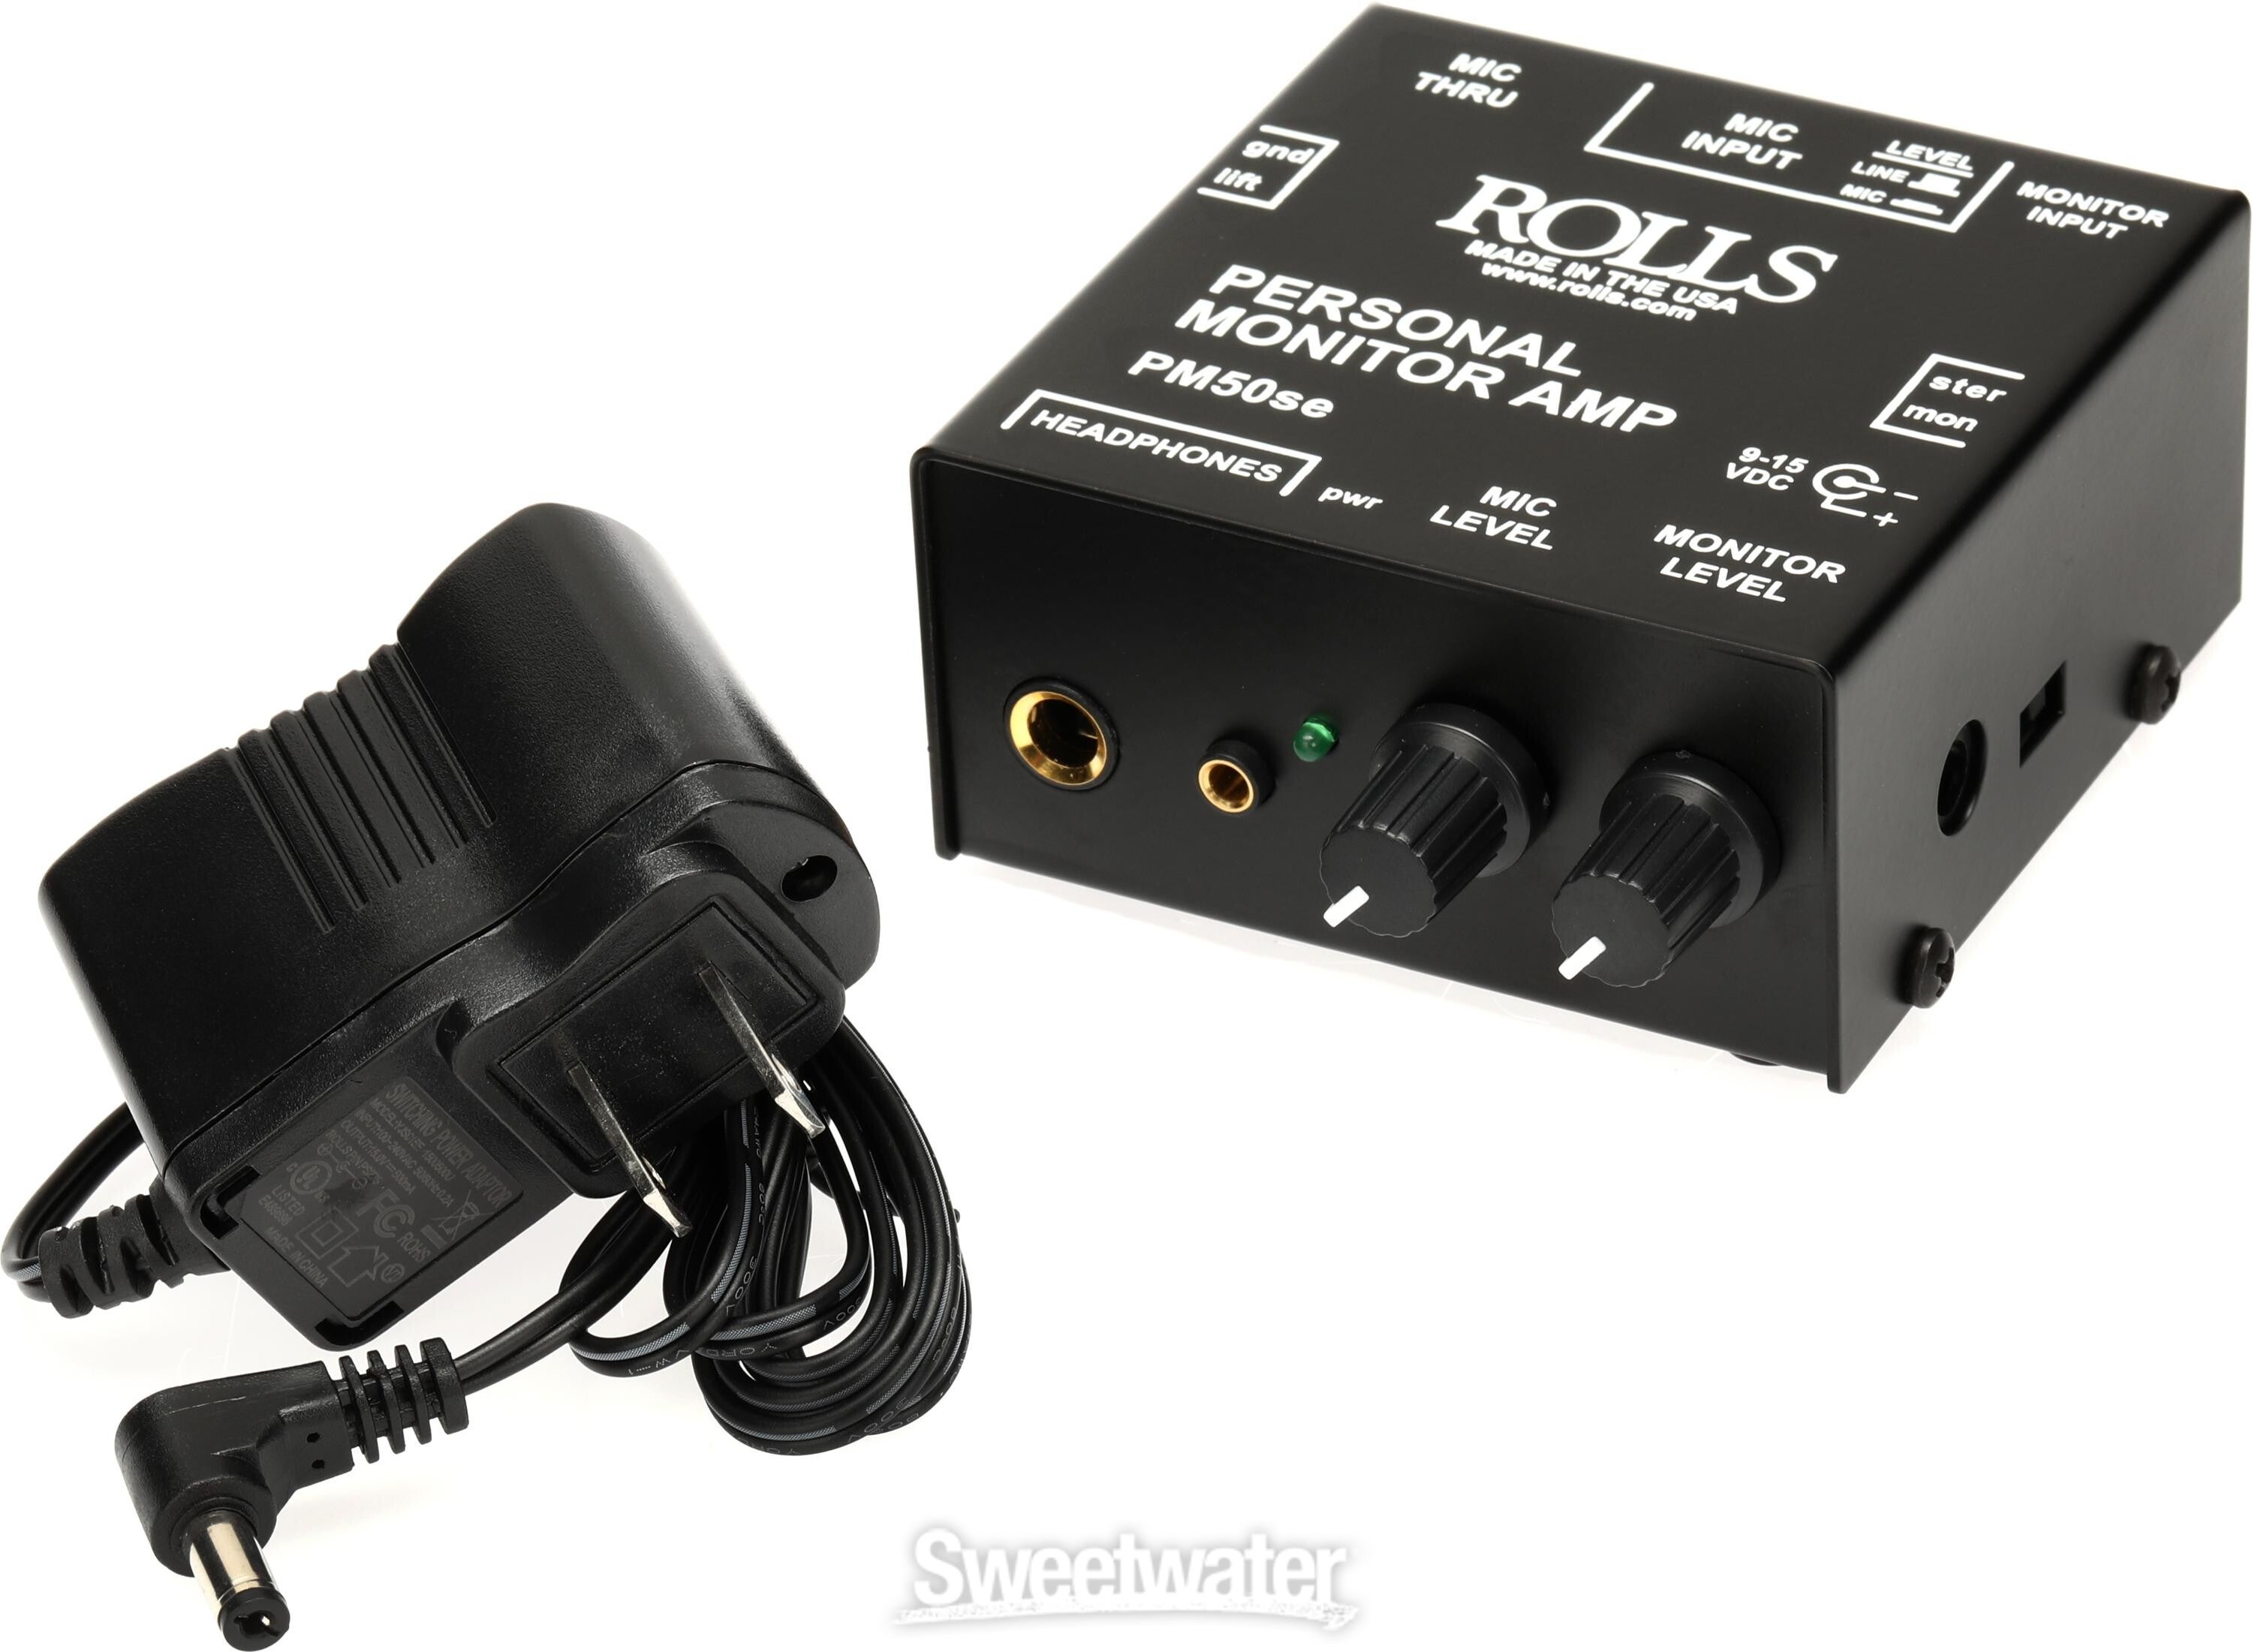 Rolls PM50se Personal Monitor Amp | Sweetwater